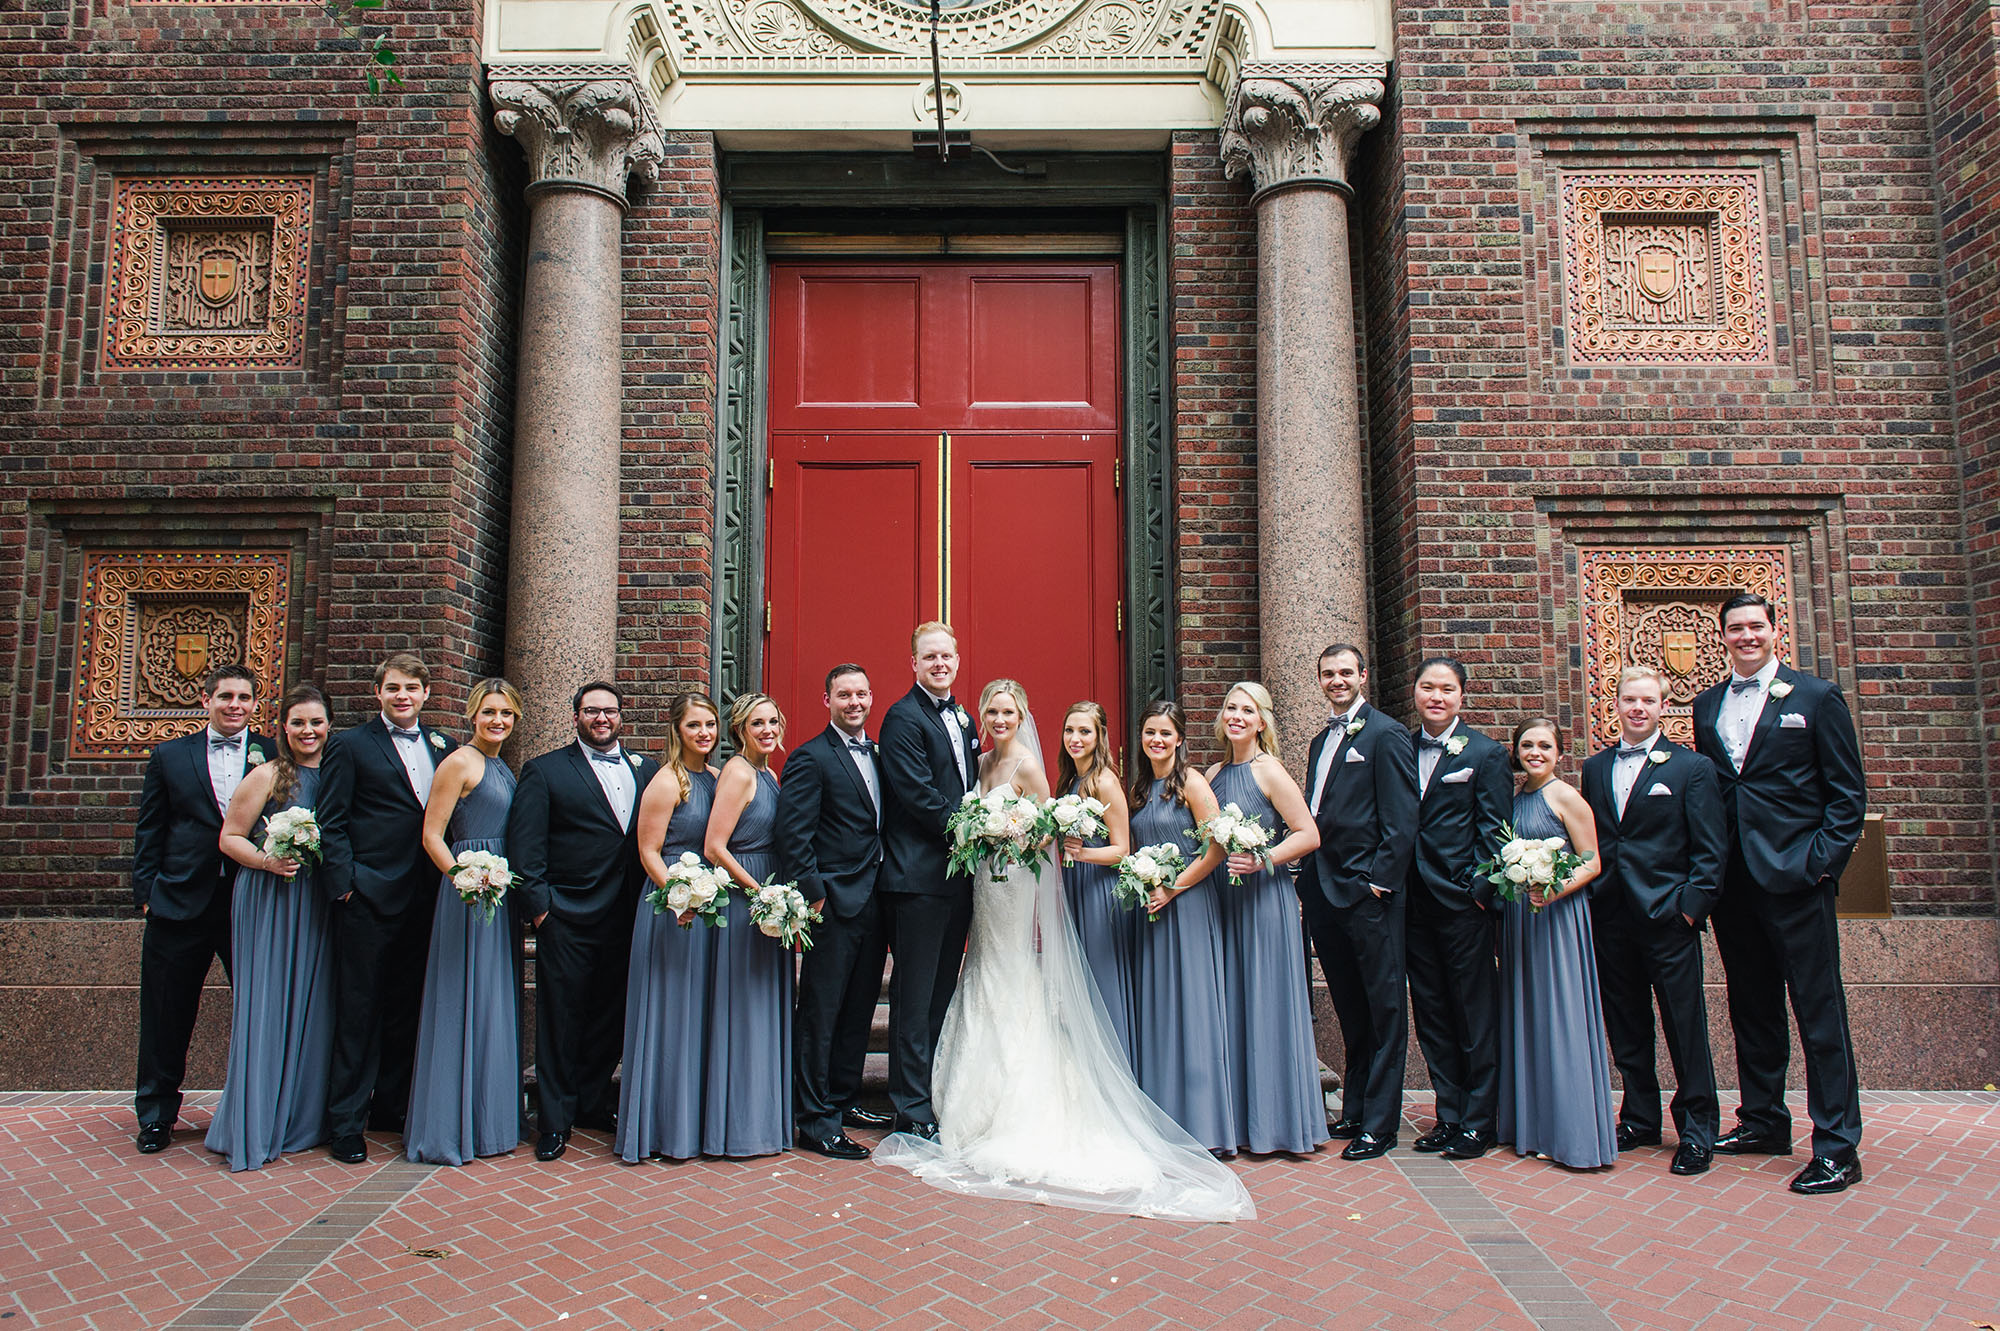 Bride, groom, and wedding party outside the church